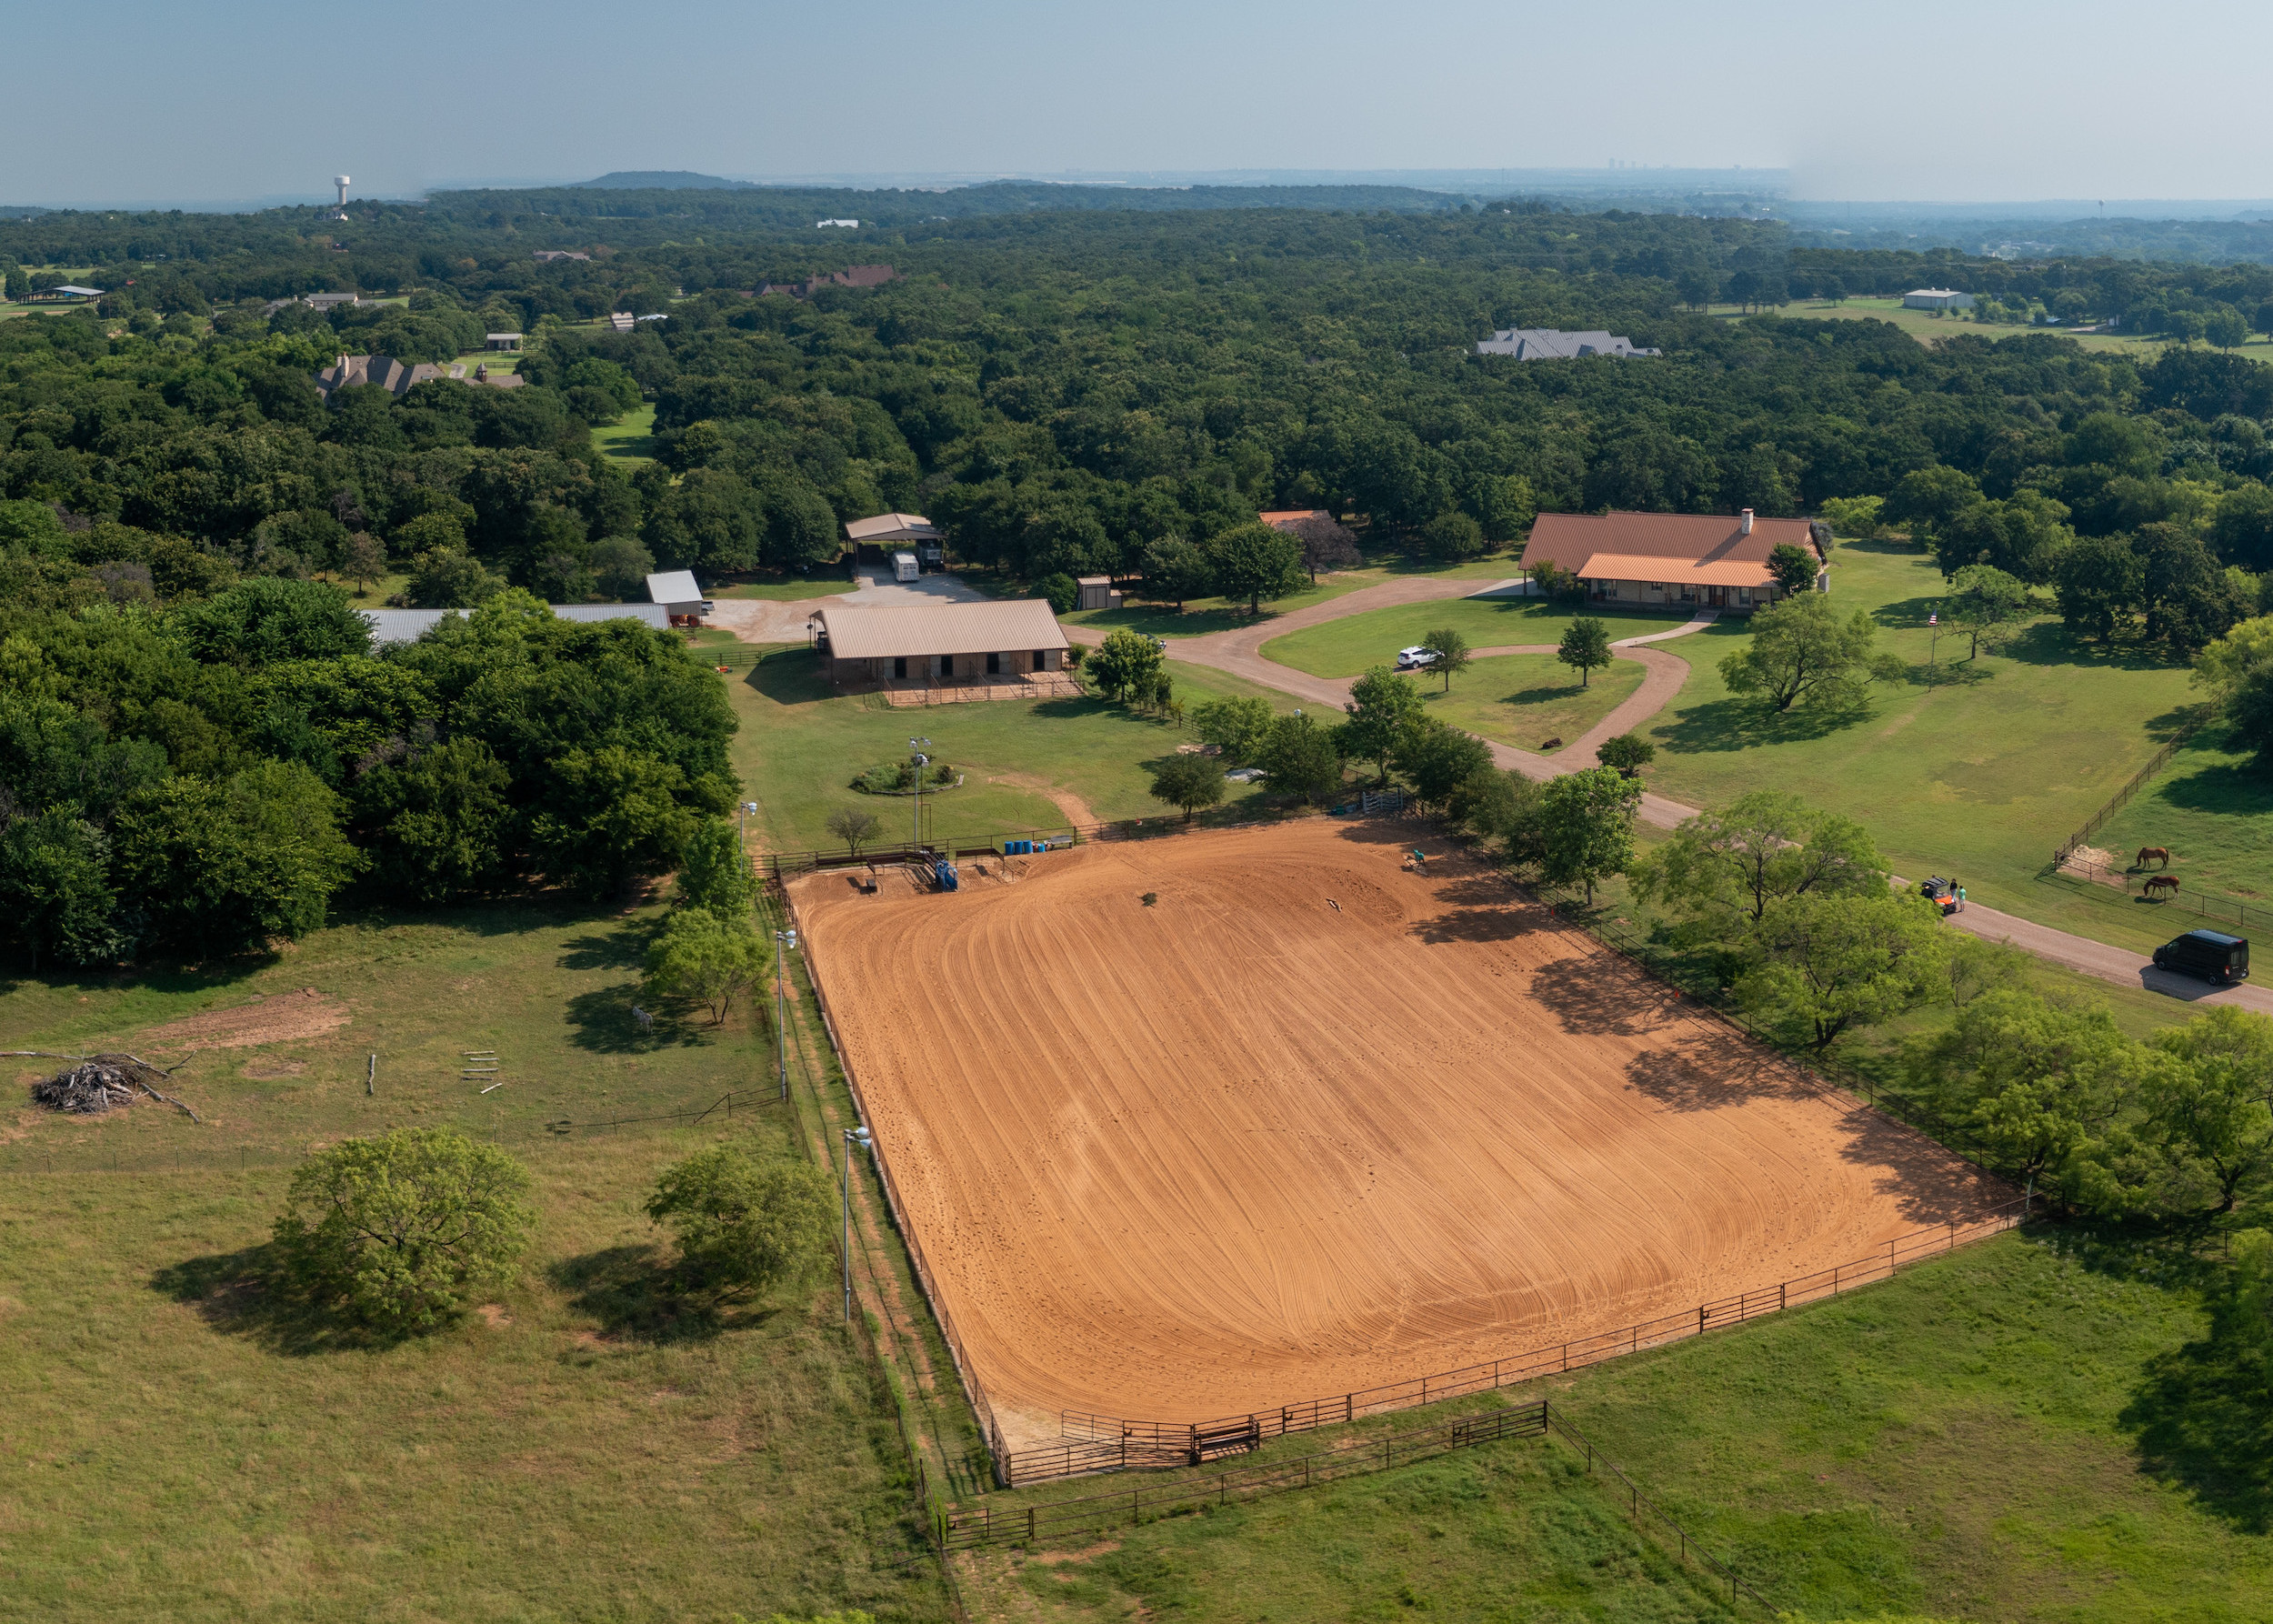 aerial photo of home, corral, barn, and horses.